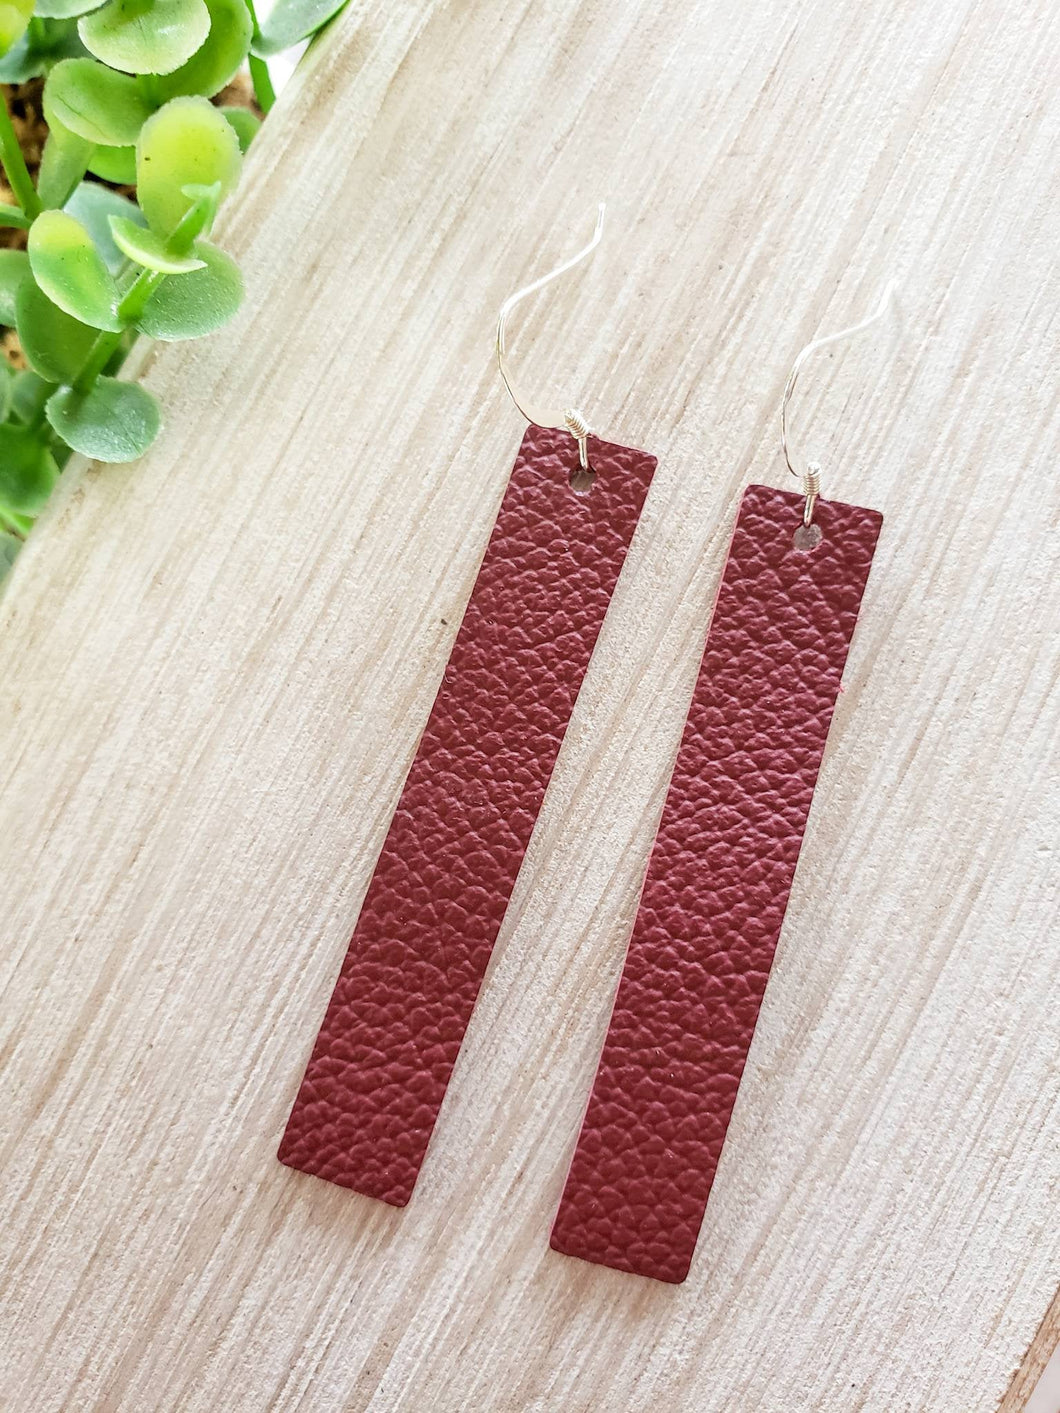 Cranberry Leather Bar Earrings